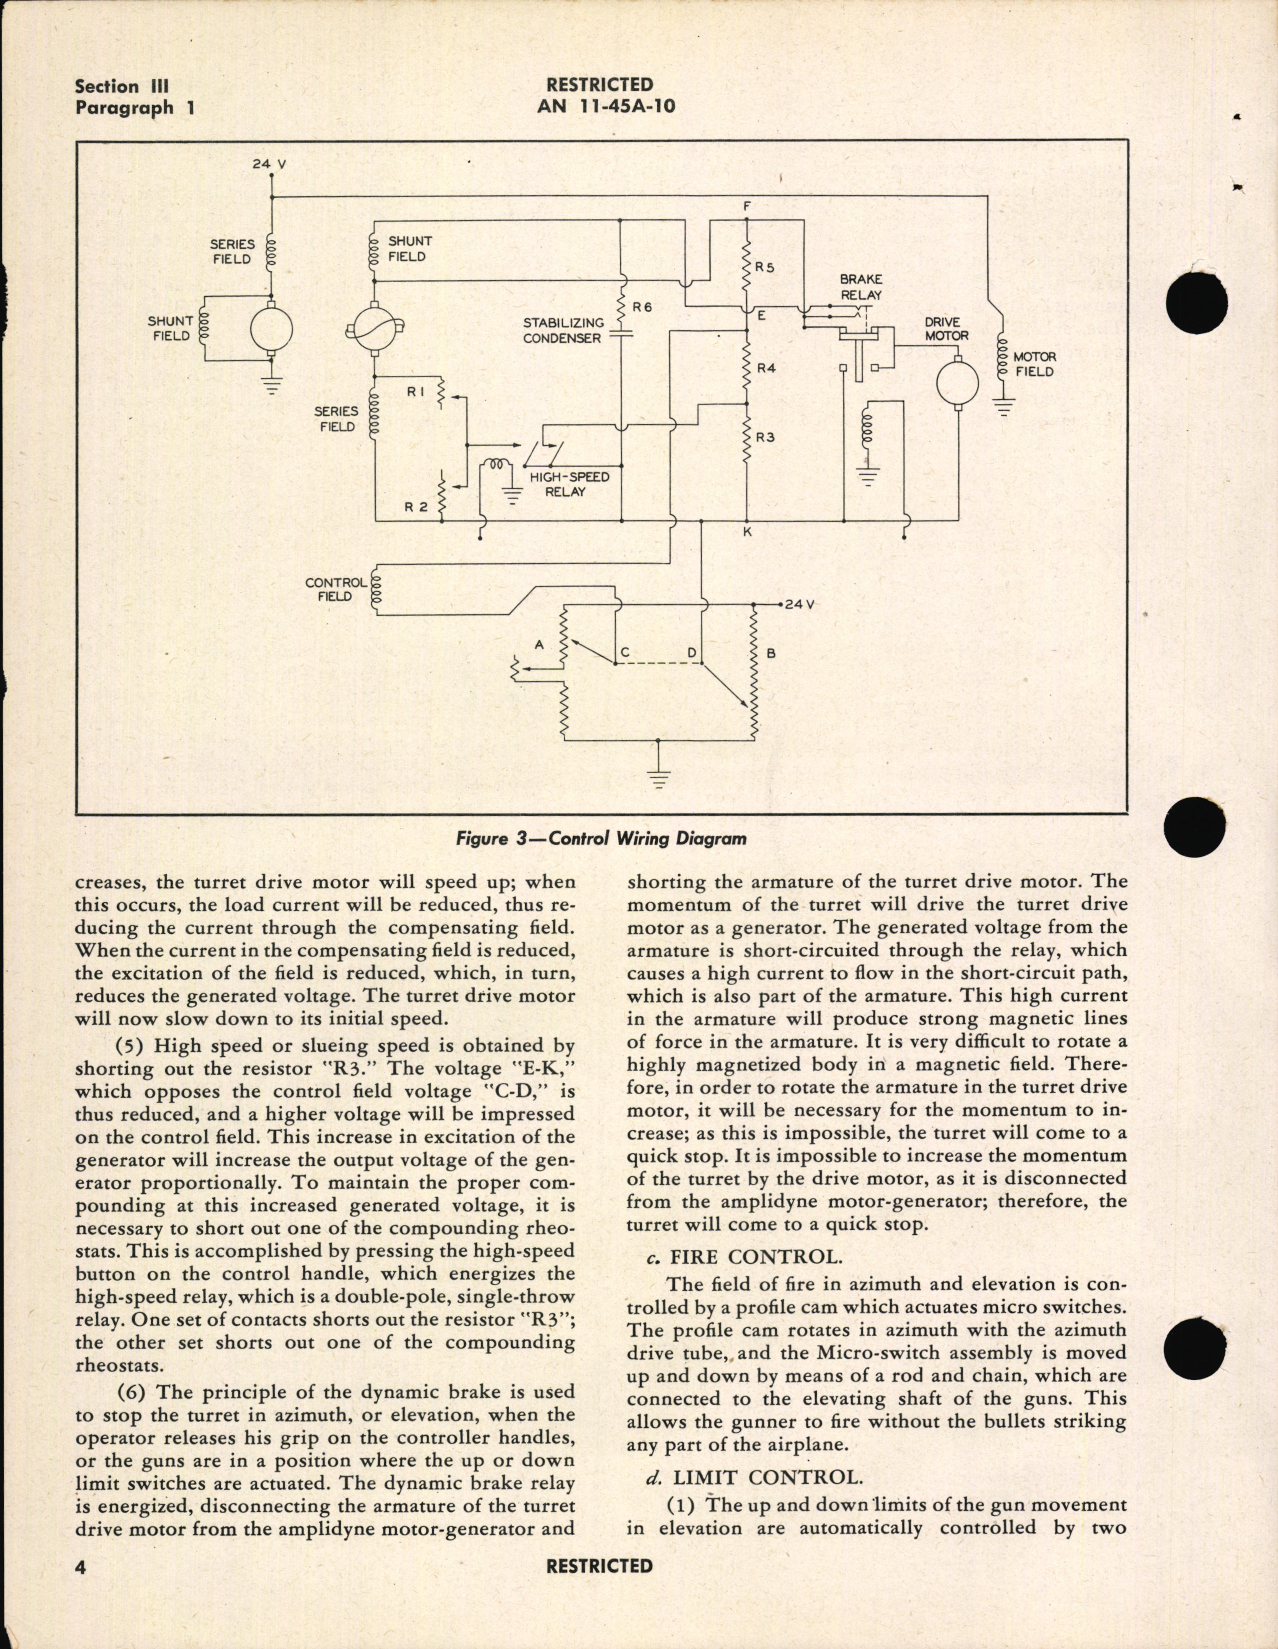 Sample page 8 from AirCorps Library document: Overhaul Instructions for Upper Turret Type A-9B, Navy Model 250CE-4